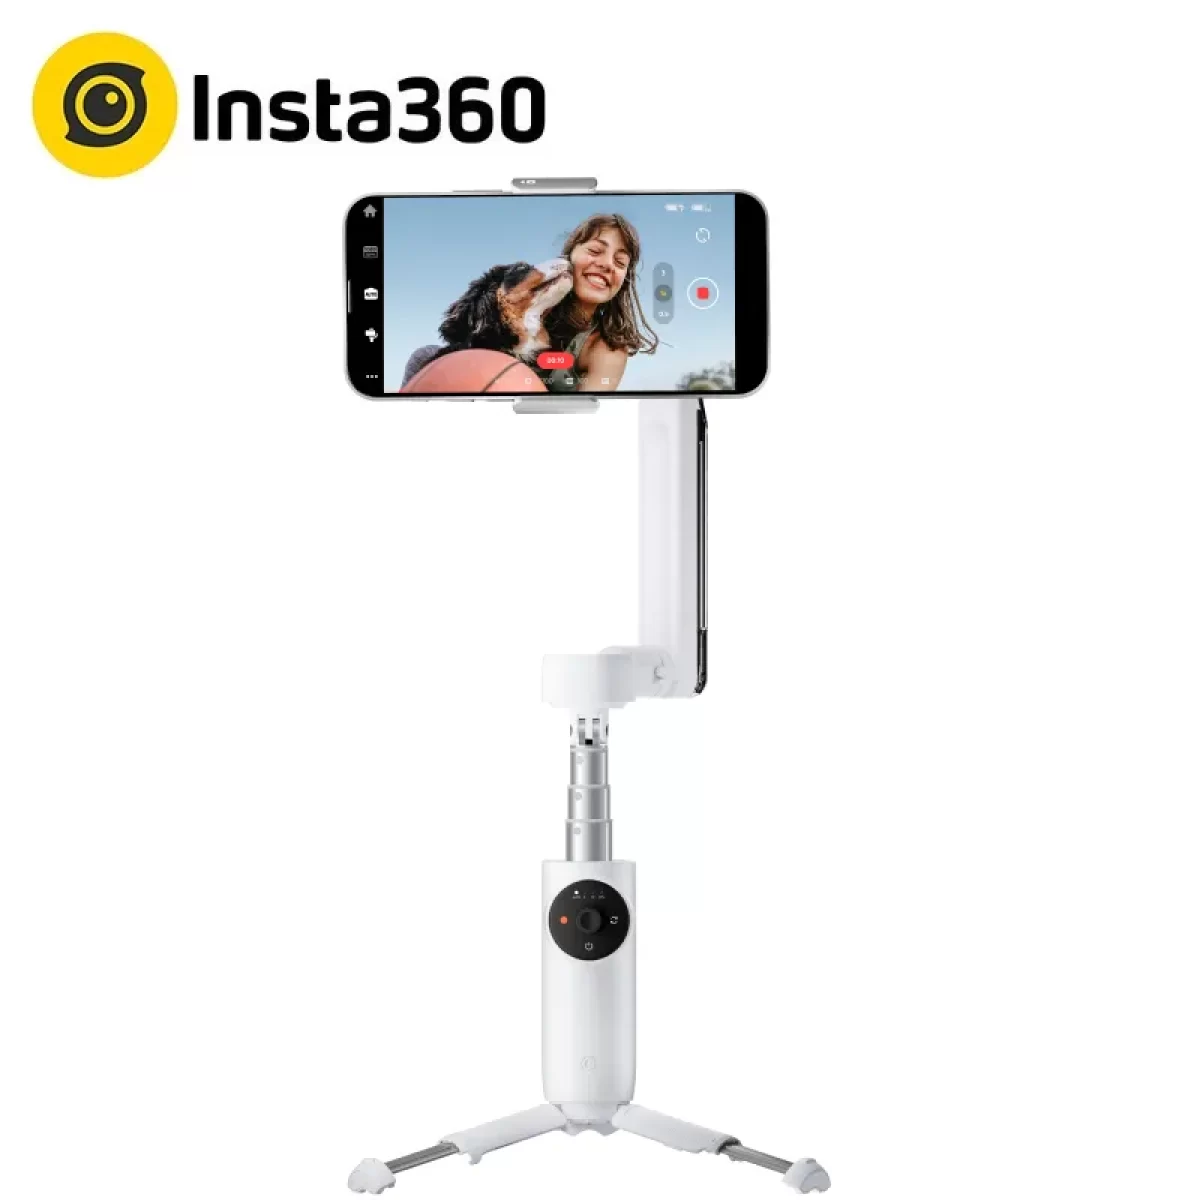 Insta360 Flow announced: an AI tracking smartphone stabilizer with